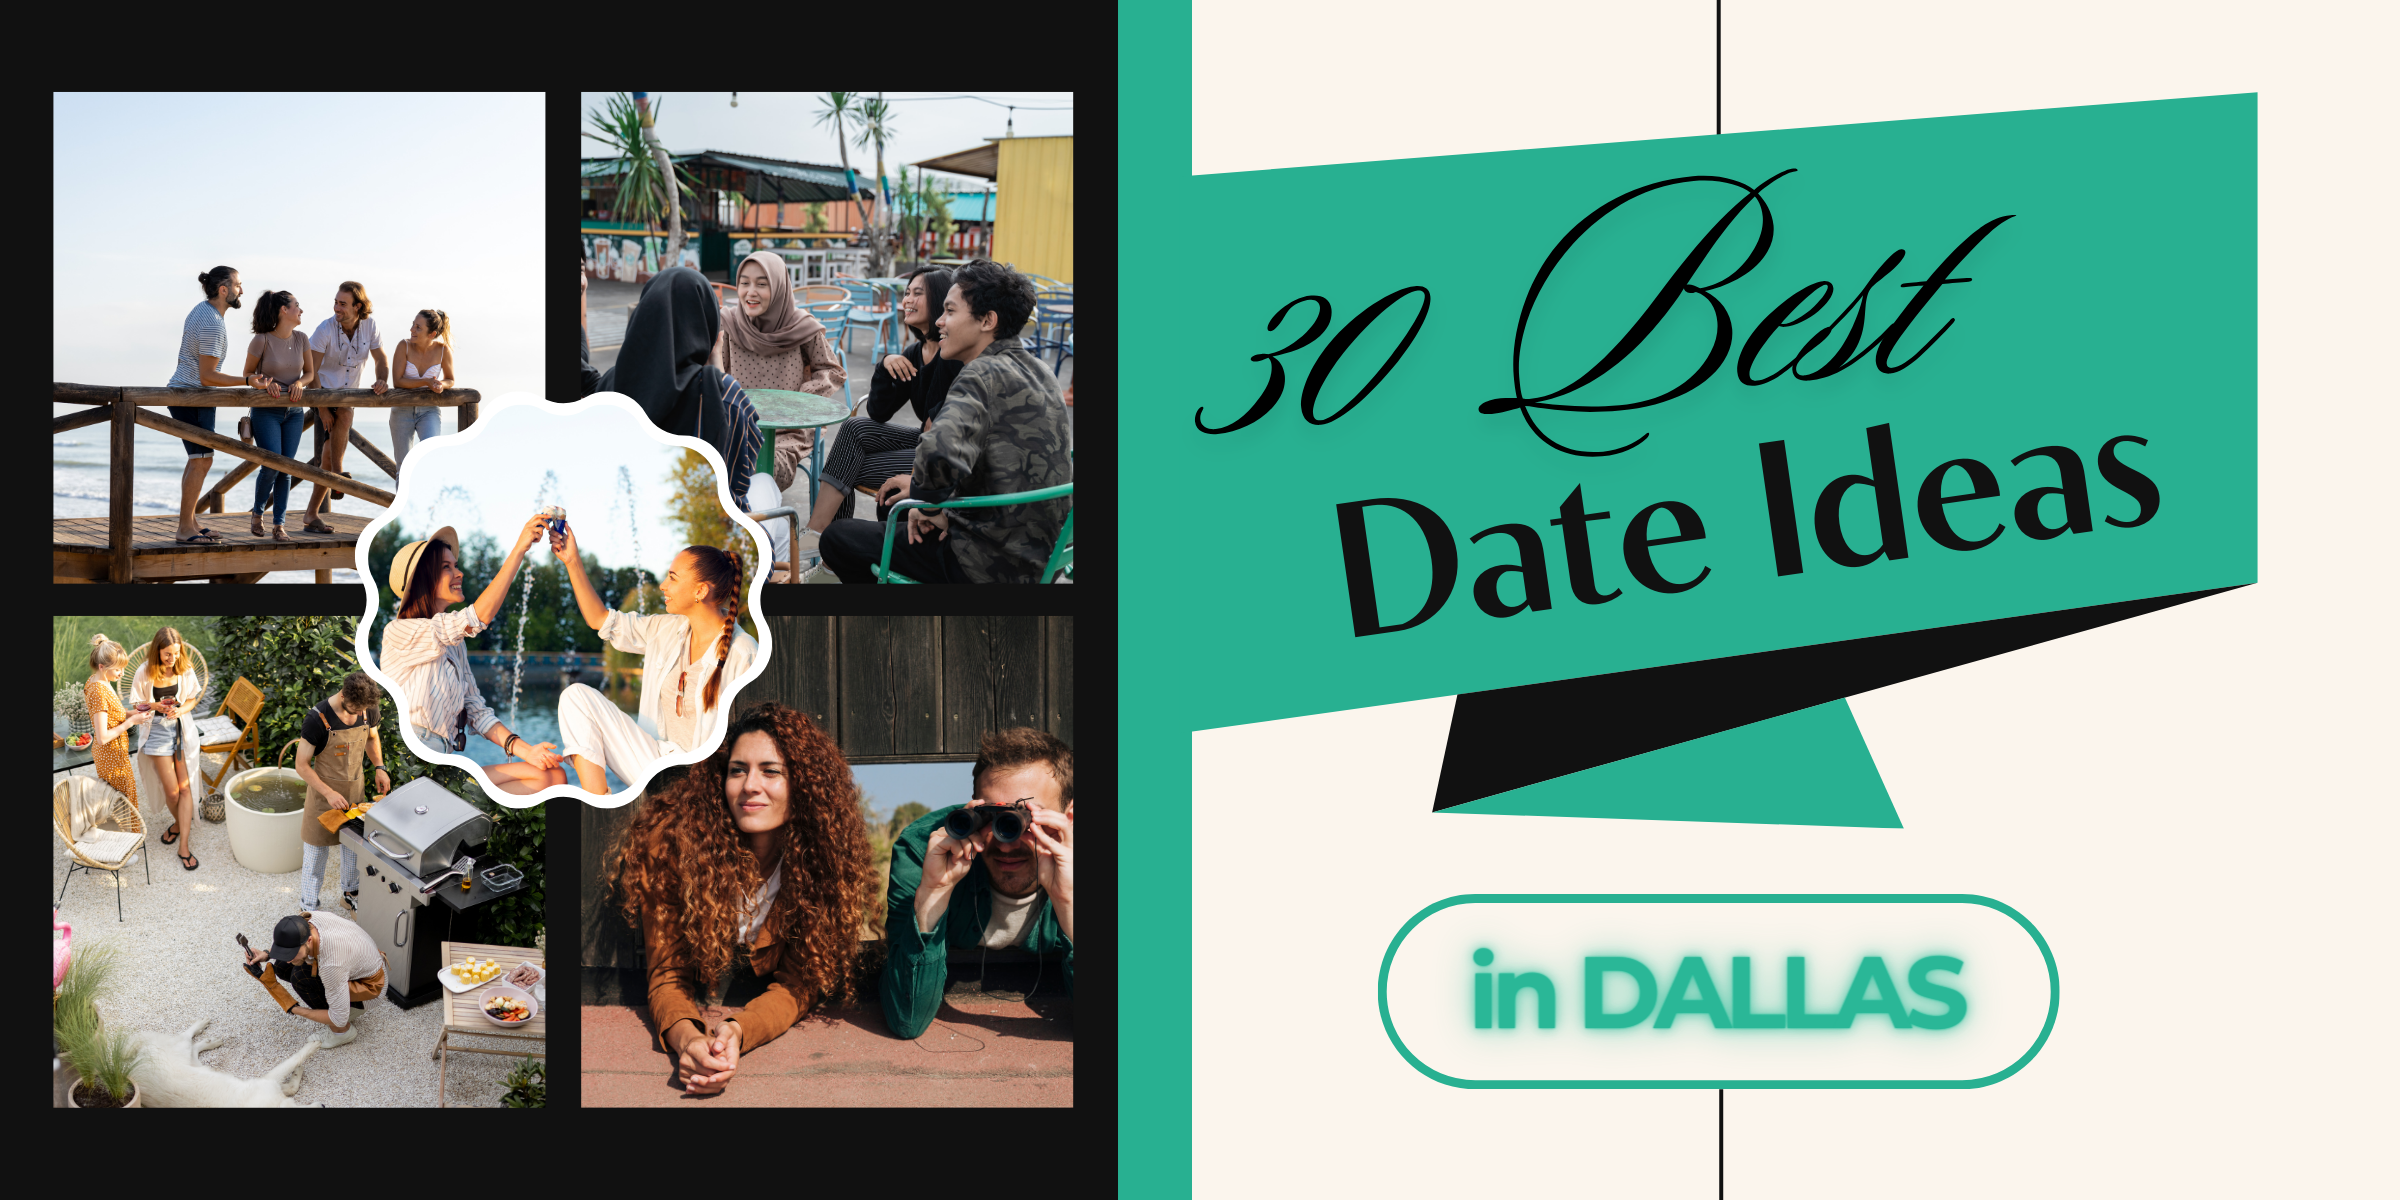 If you’re looking to impress your date in the Big D, you’ve come to the right place. Check out our guide to all the 30 best date ideas in Dallas!